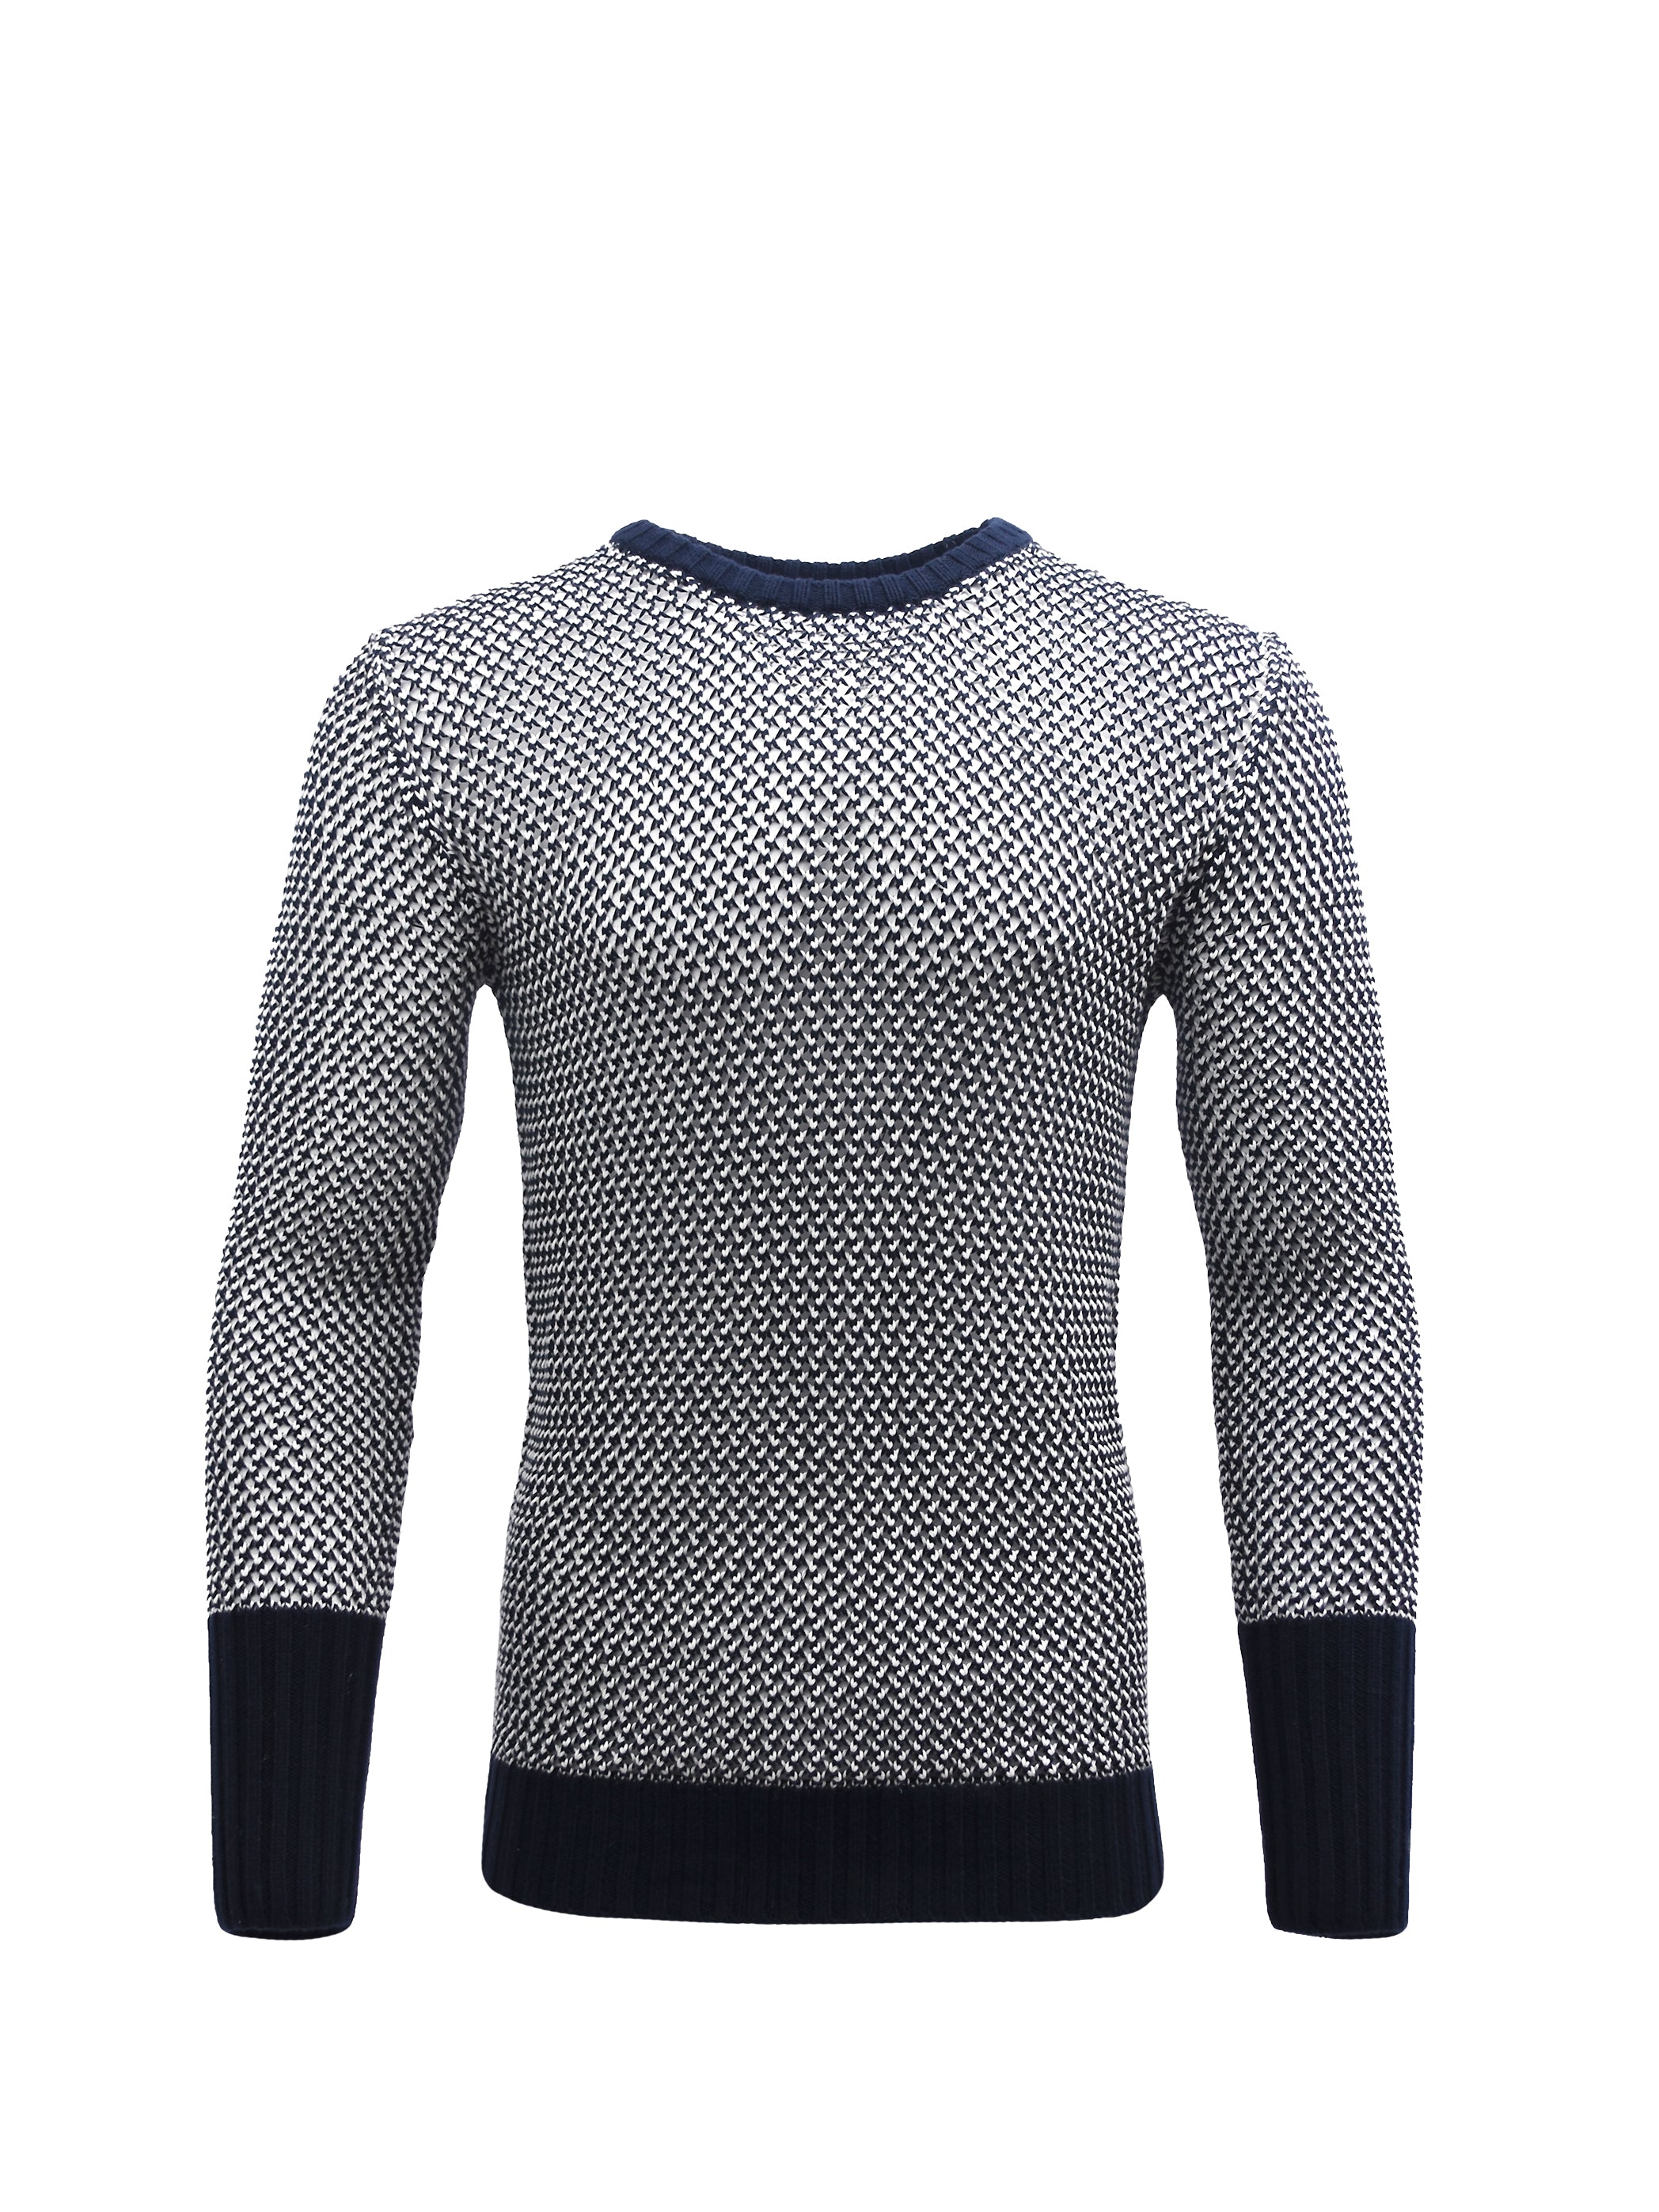 BLACK AND WHITE LIGHTWEIGHT KNITTED JUMPER